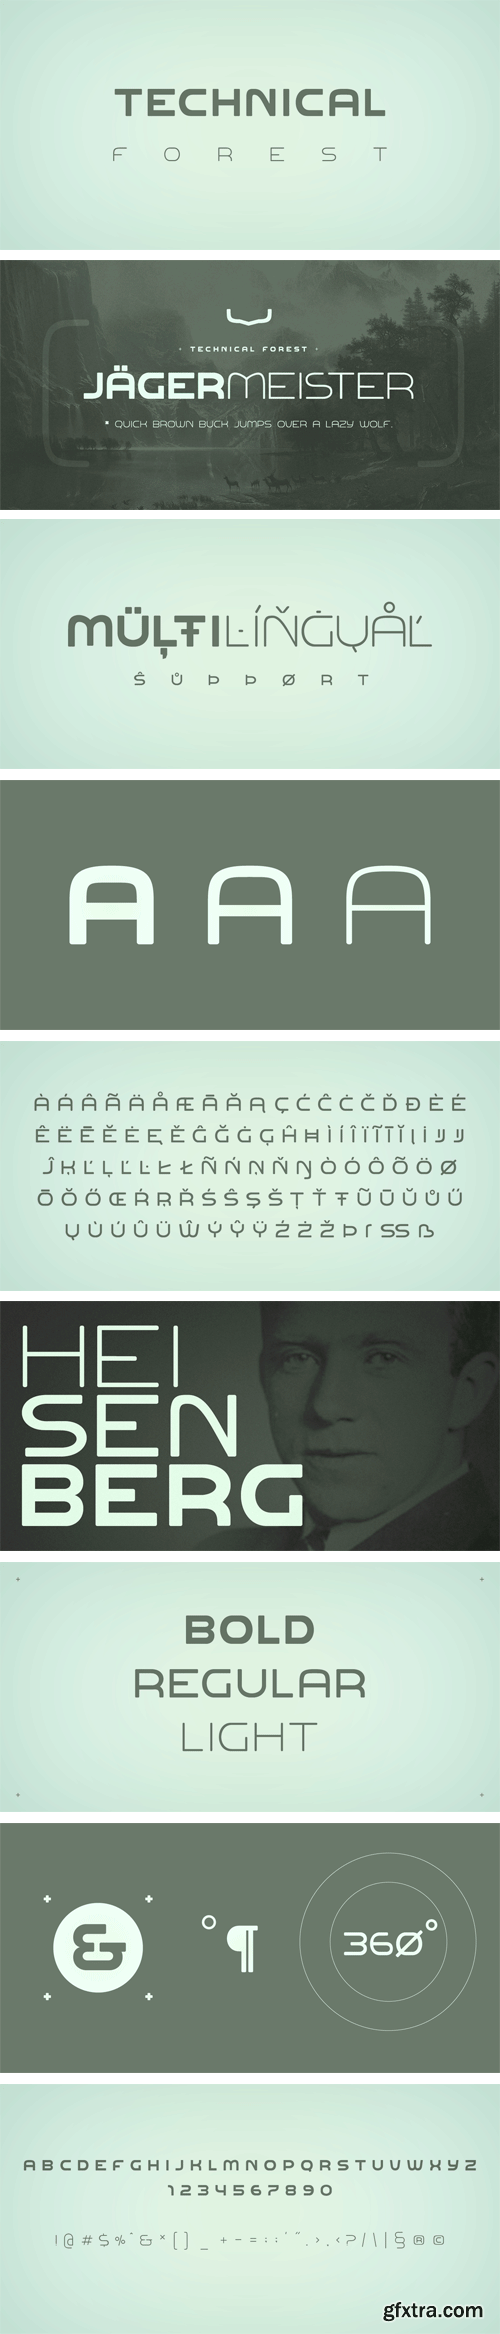 Technical Forest Font Family - 3 Fonts $15